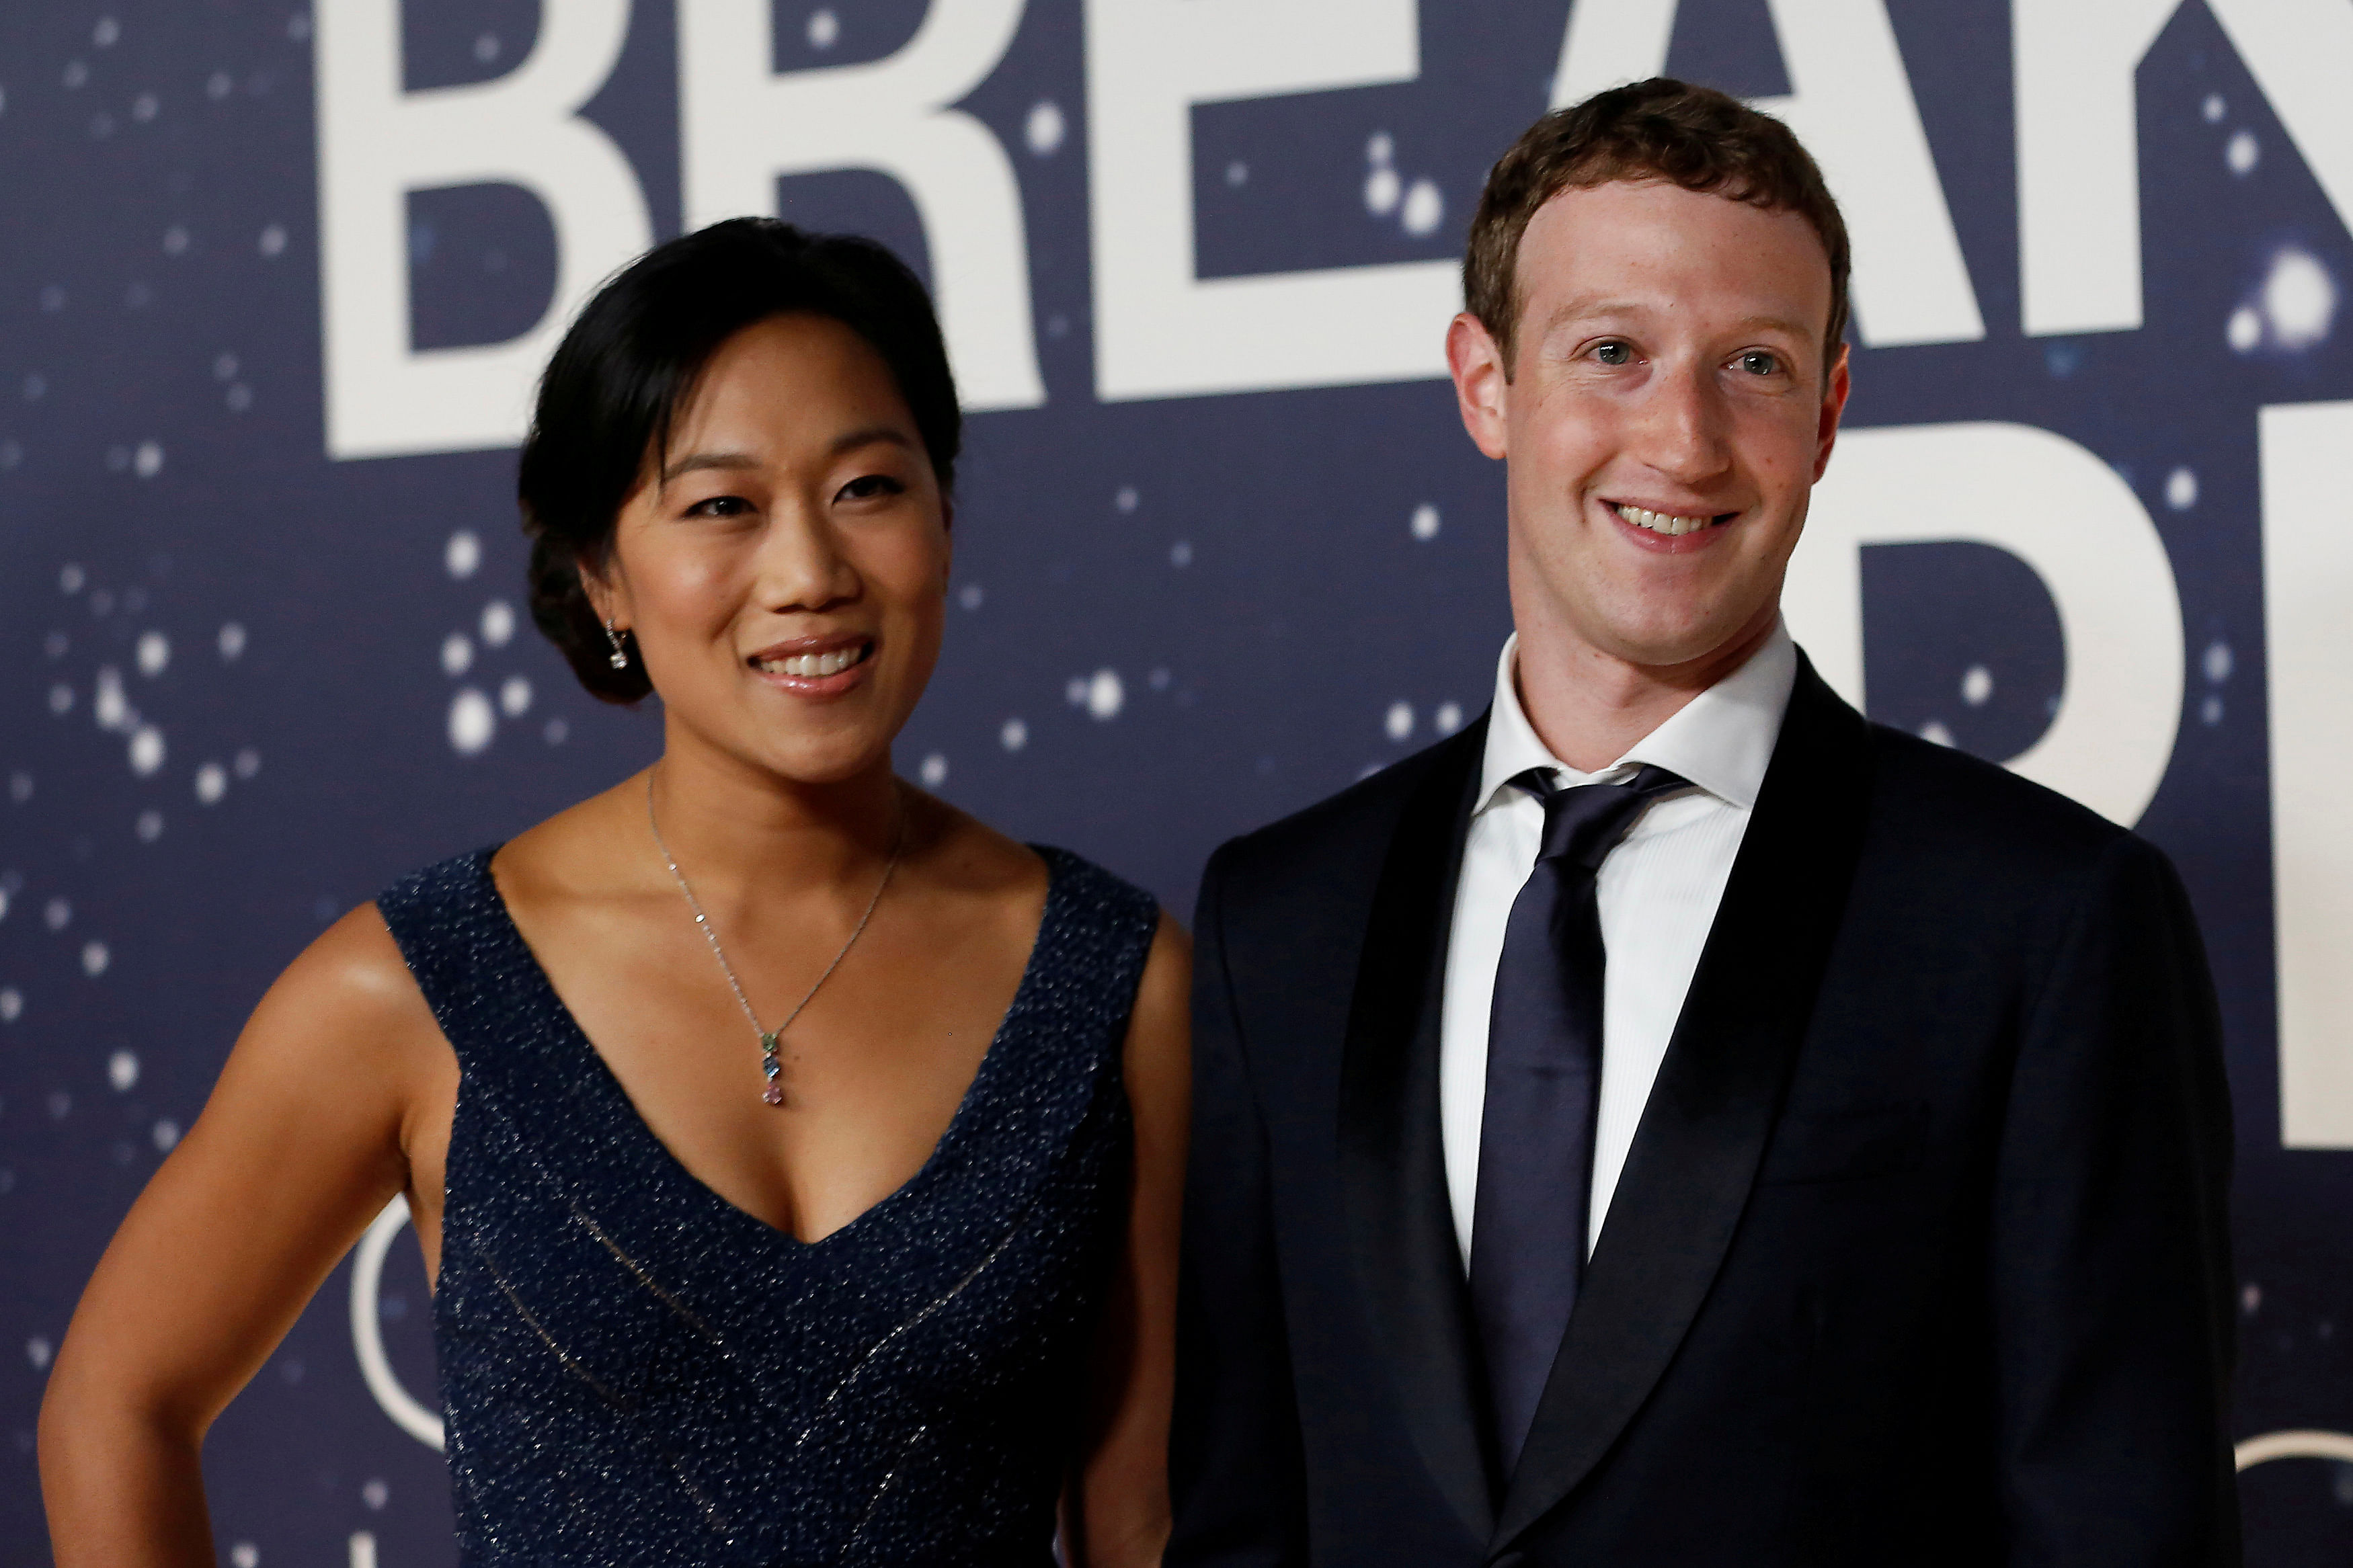 Mark Zuckerberg, founder and CEO of Facebook, and wife Priscilla Chan. Credit: Reuters File Photo